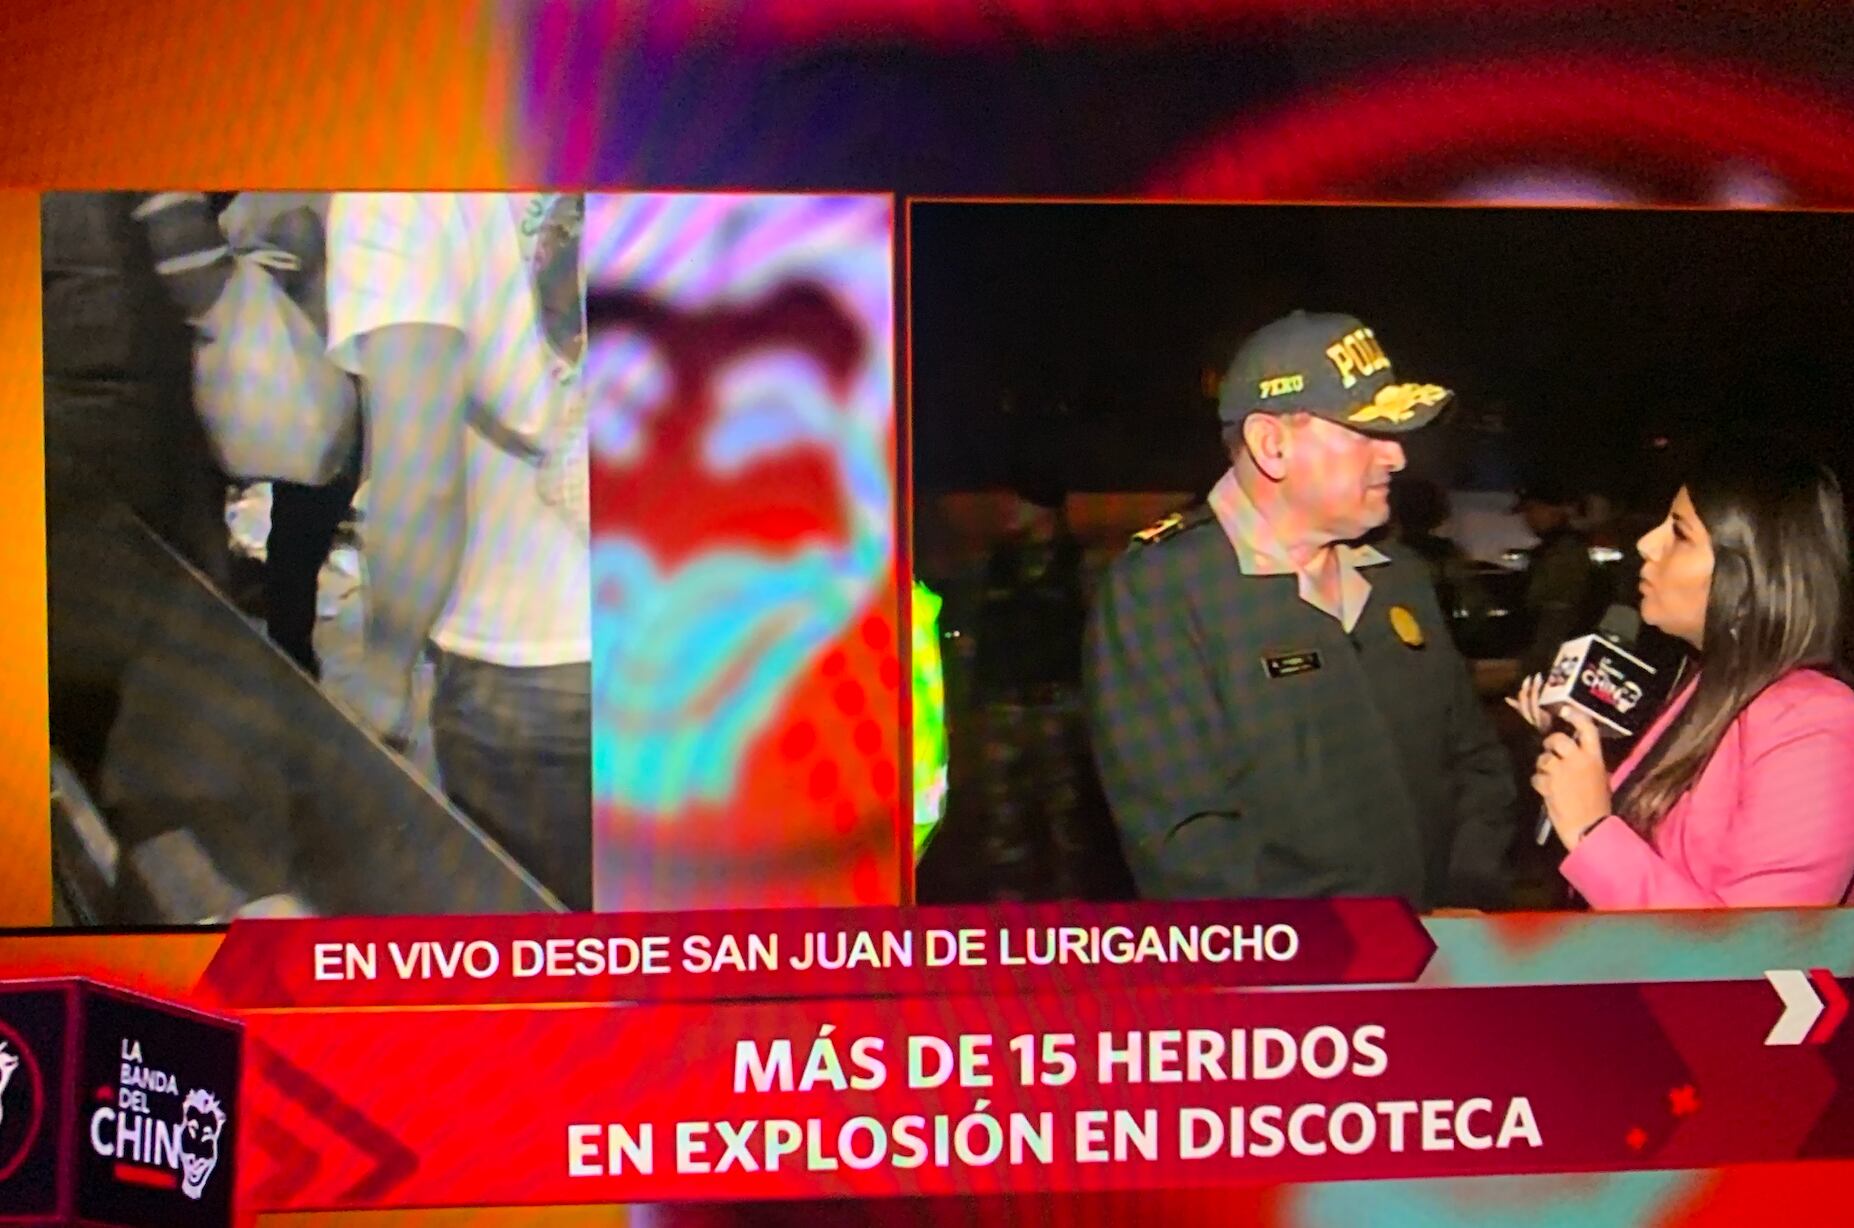 General PNP explains the situation of injuries caused by an explosion at a nightclub in San Juan de Luricancho.